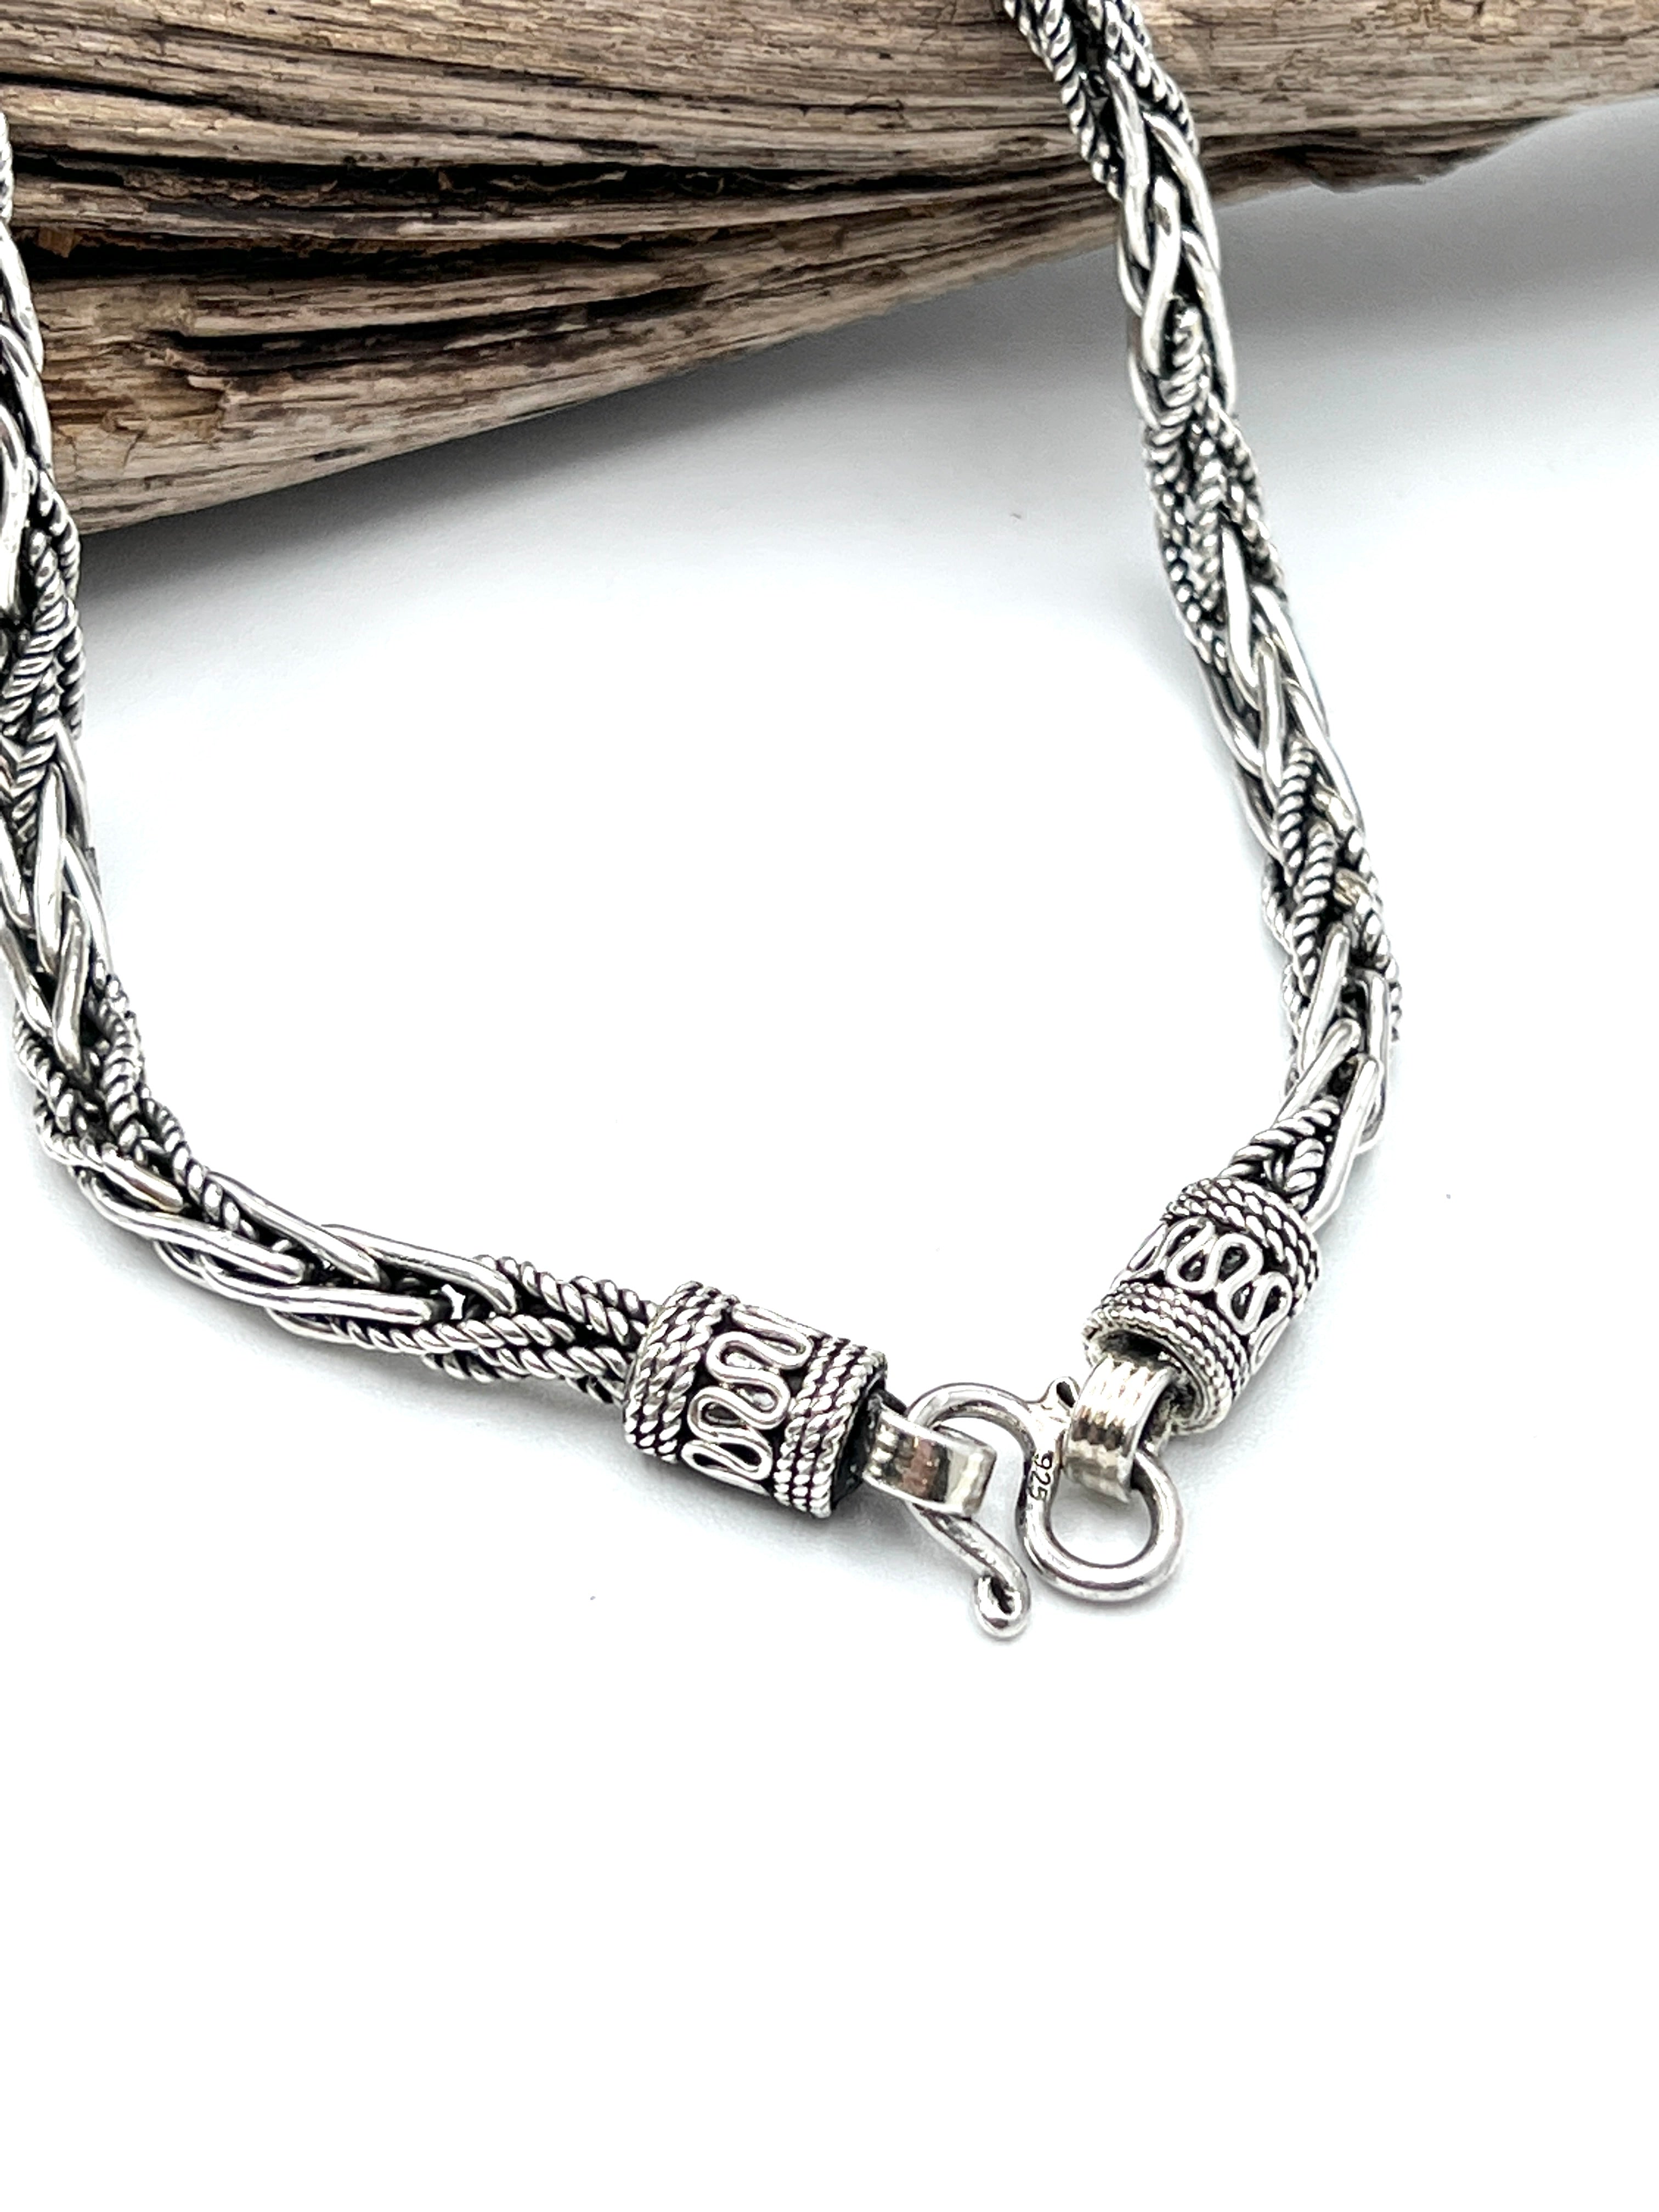 Authentic Solid Sterling Silver Rope Diamond-Cut Braided Twist Link .925  ITProLux Necklace Chains 1MM - 5MM, 16